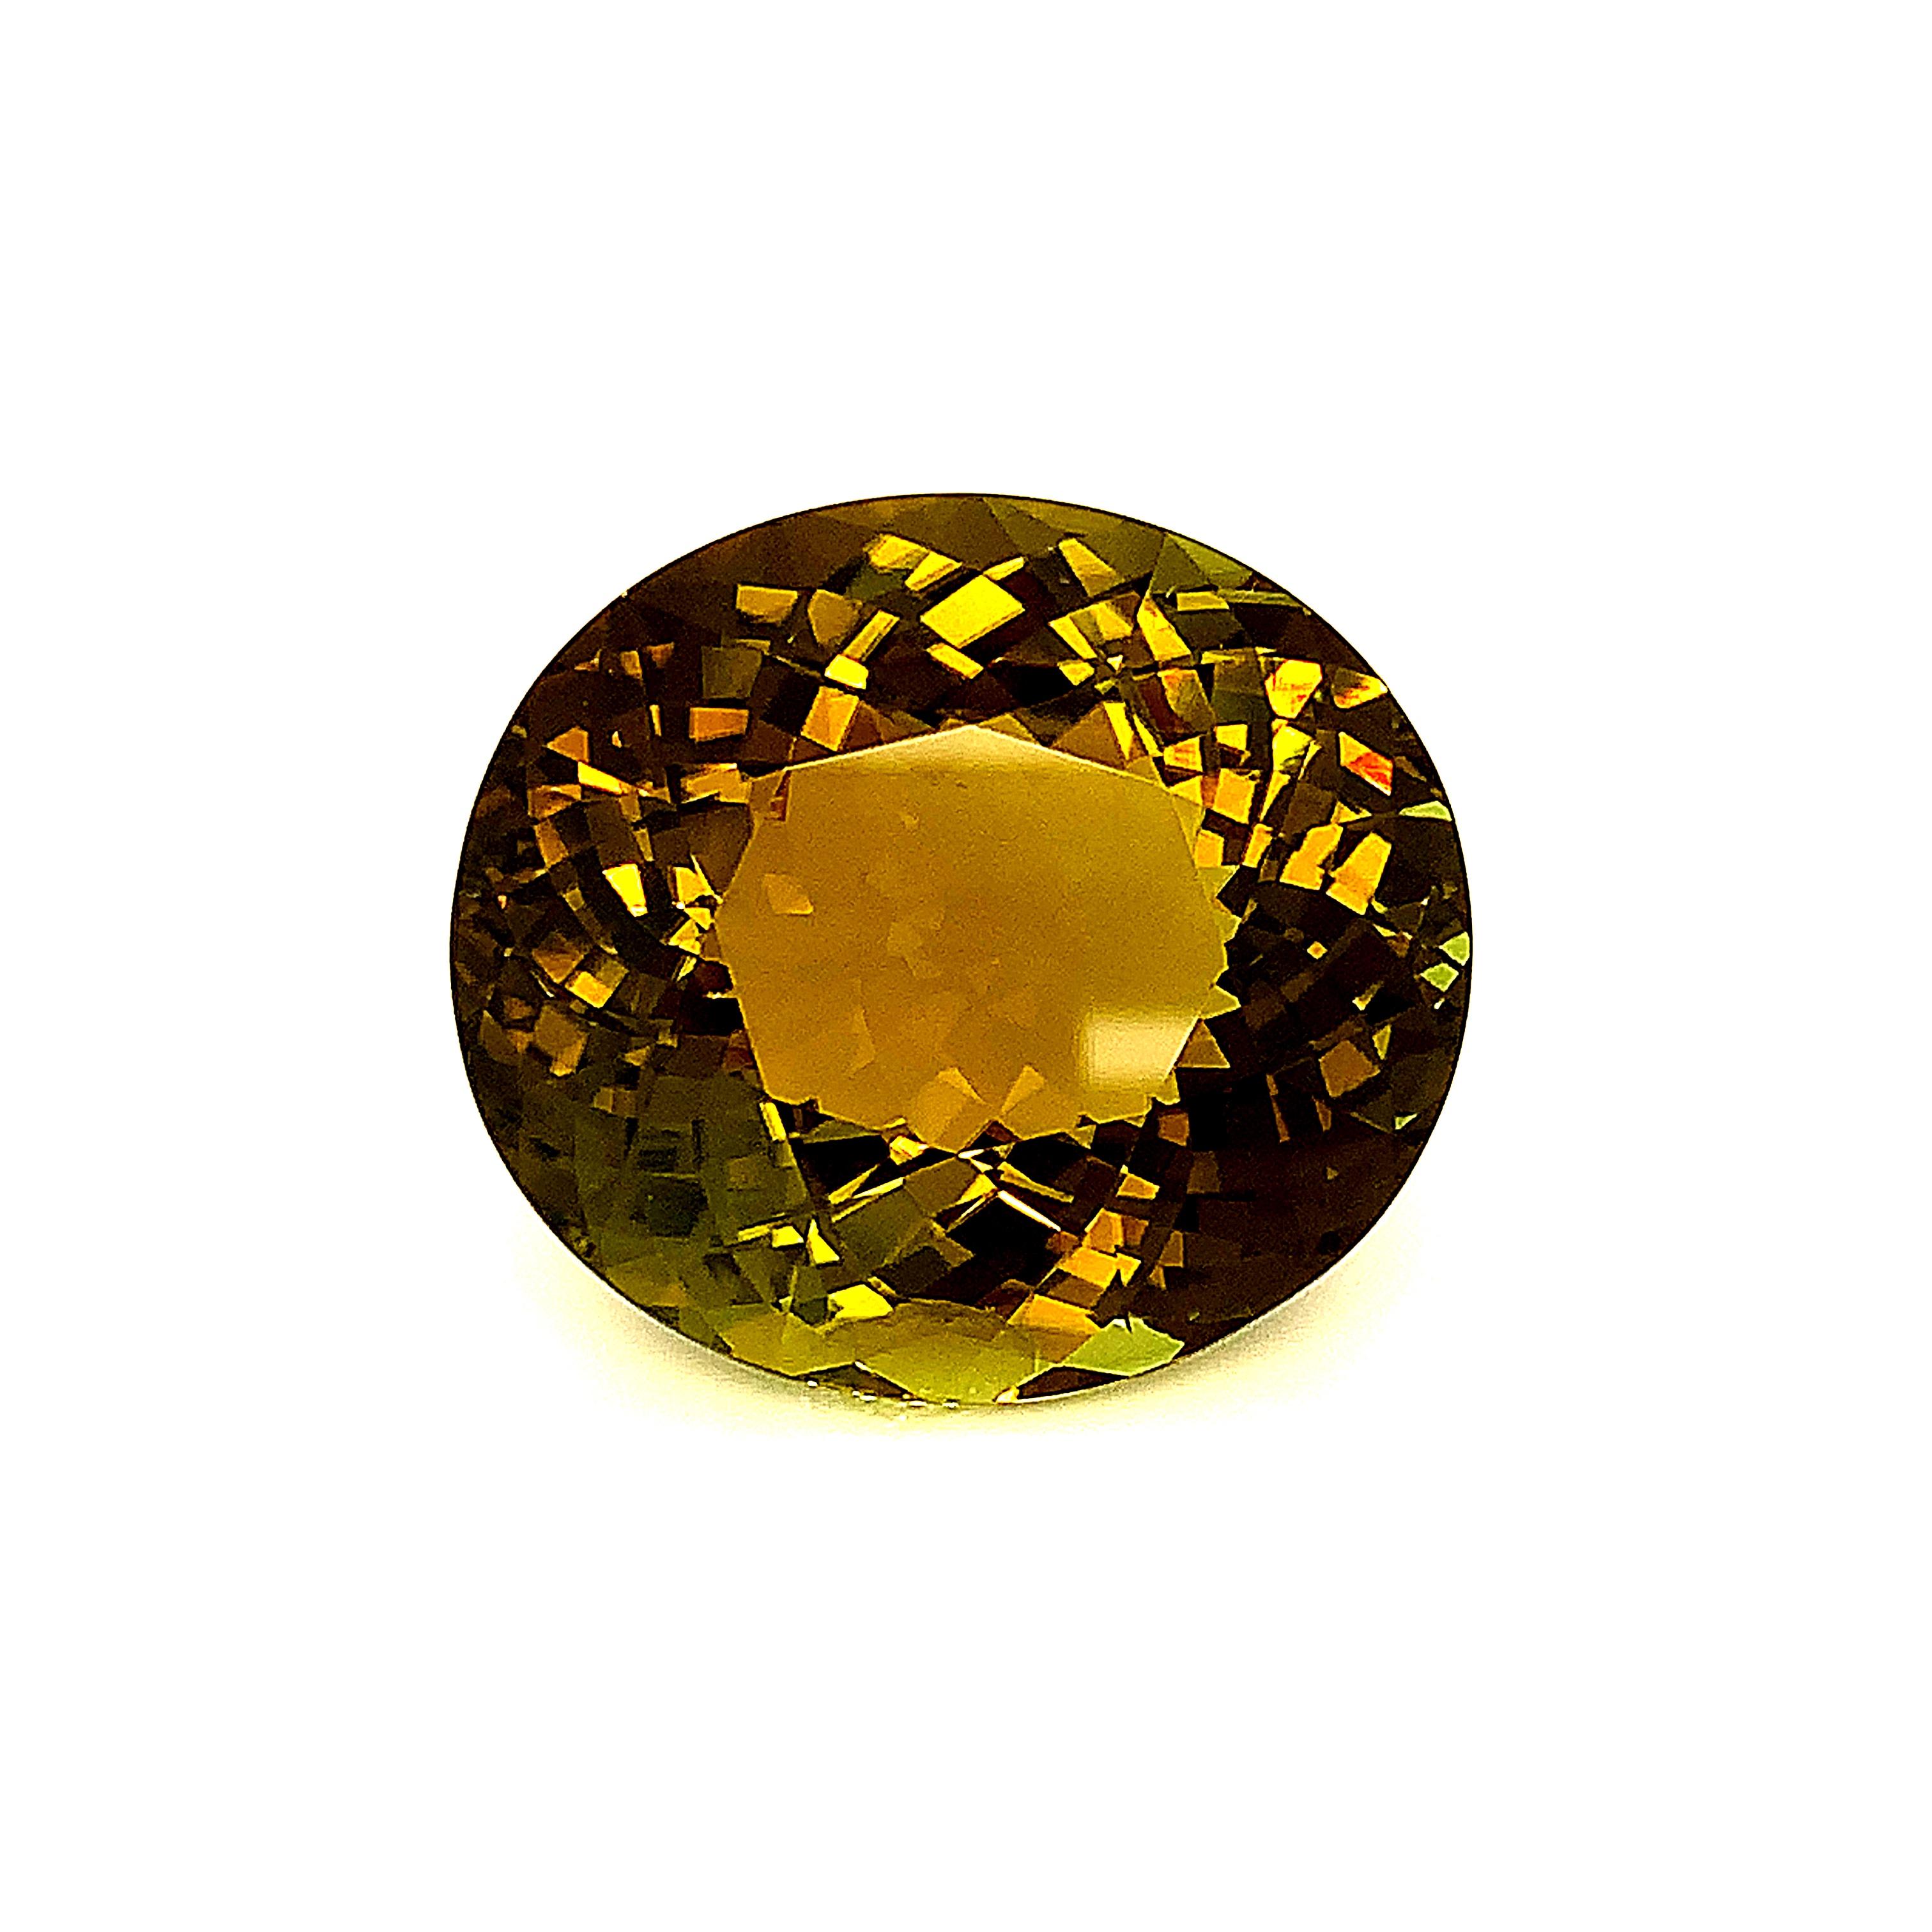 Women's or Men's  79.78 Carat Golden Olive Tourmaline Oval, Loose Gemstone, GIA Certified ...A For Sale